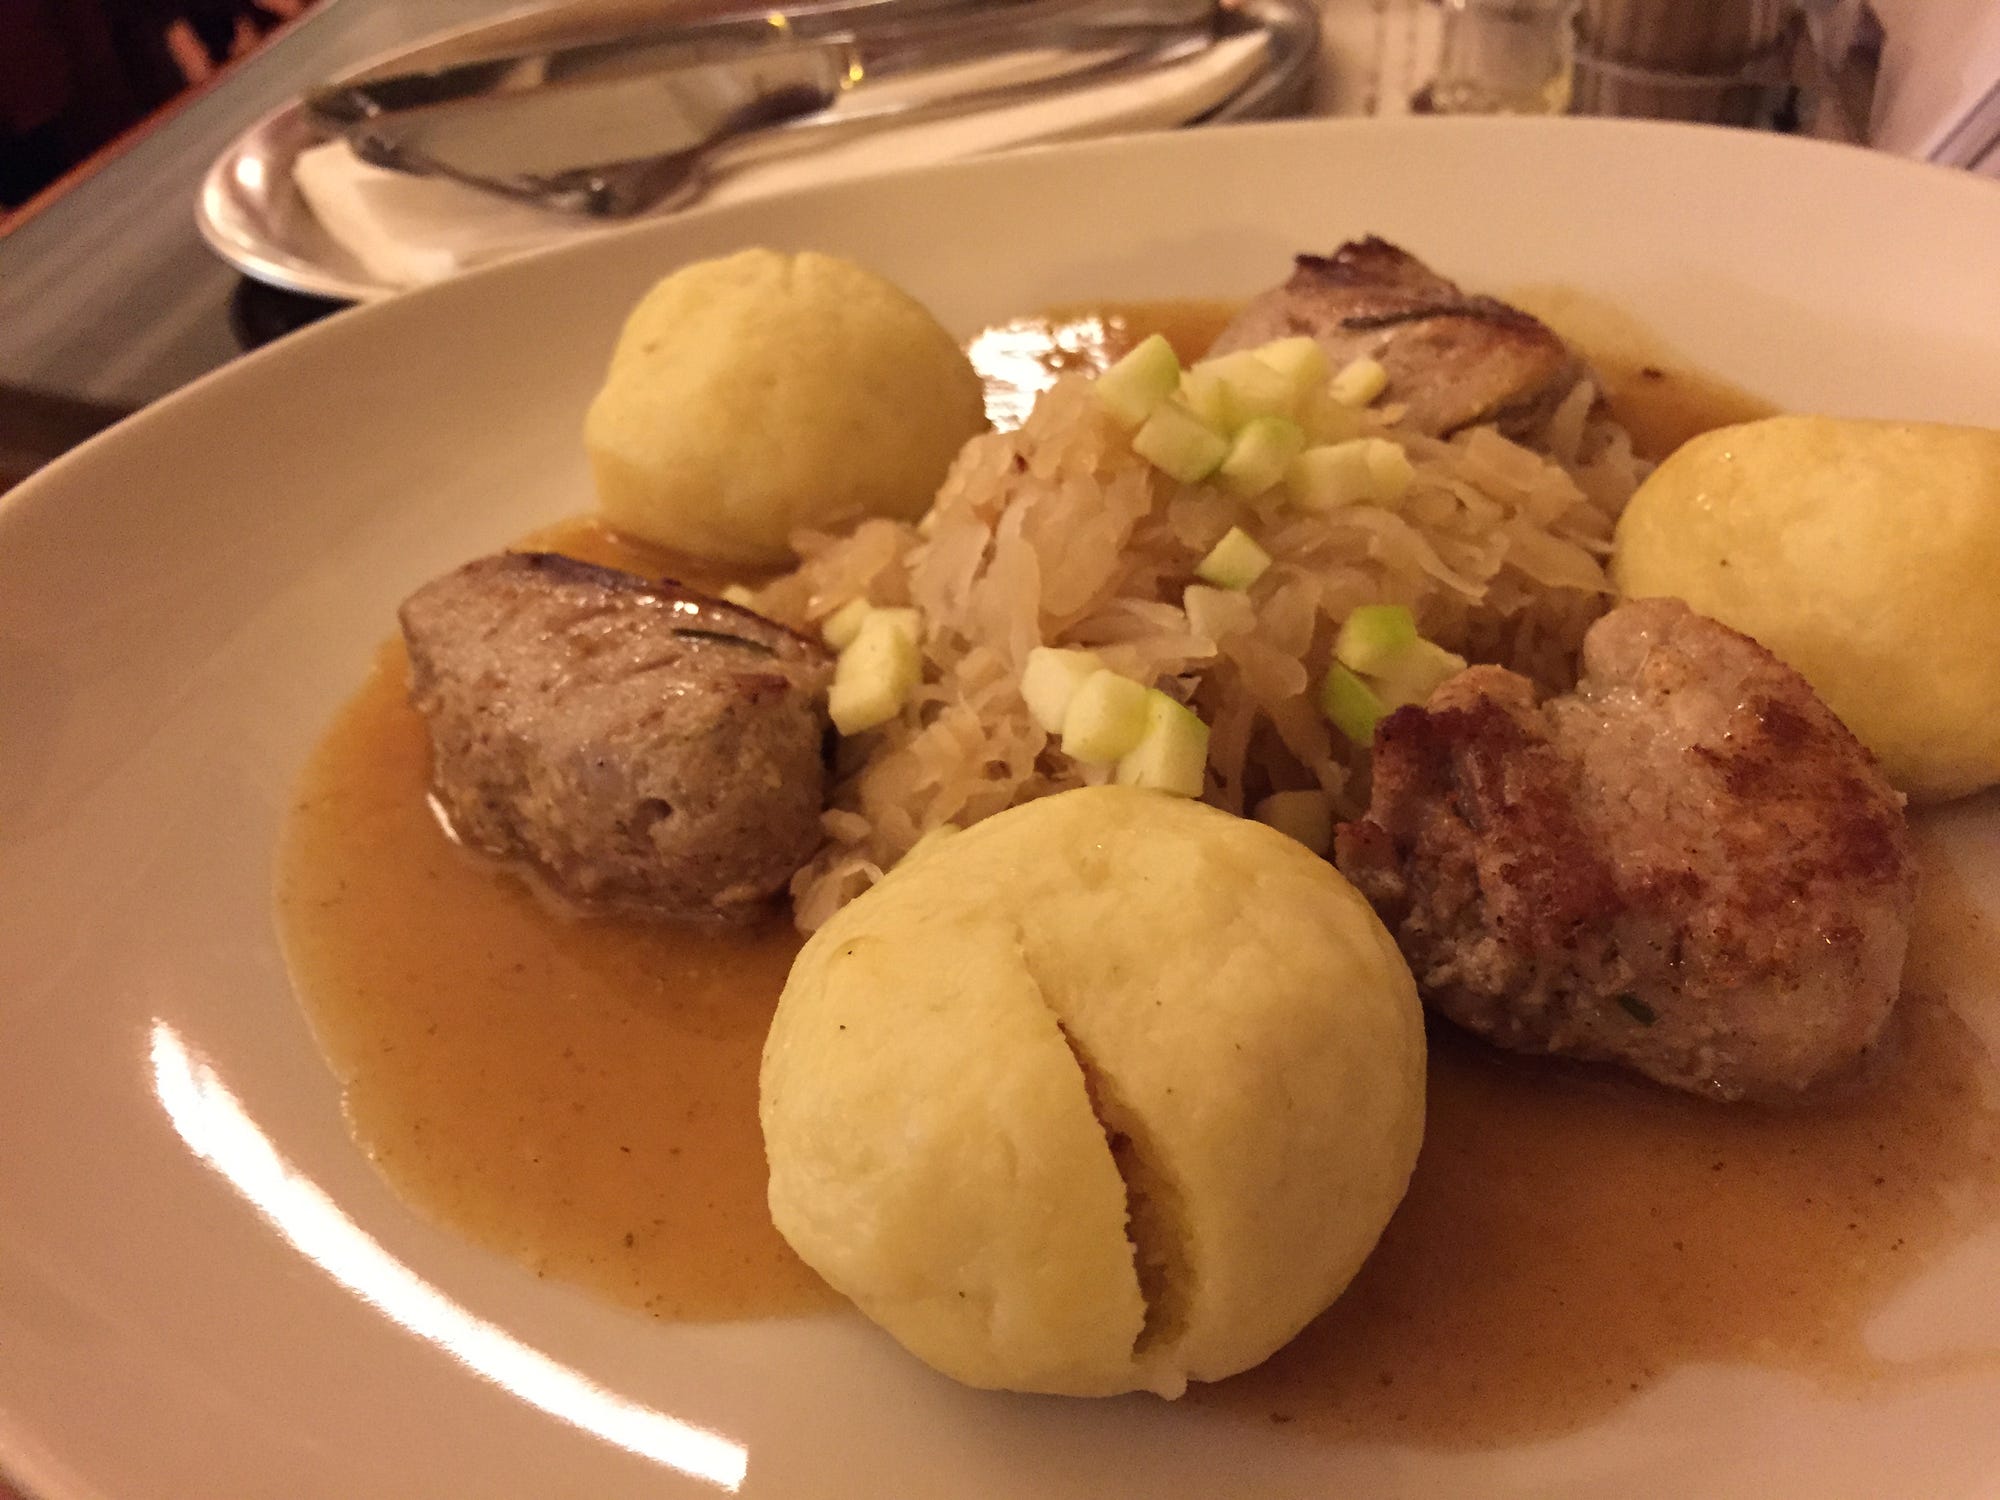 Behold traditional Czech fare, meat and potato dumplings with sauerkraut at a “recommended restaurant”. It tasted as it looks on this photo, bland.